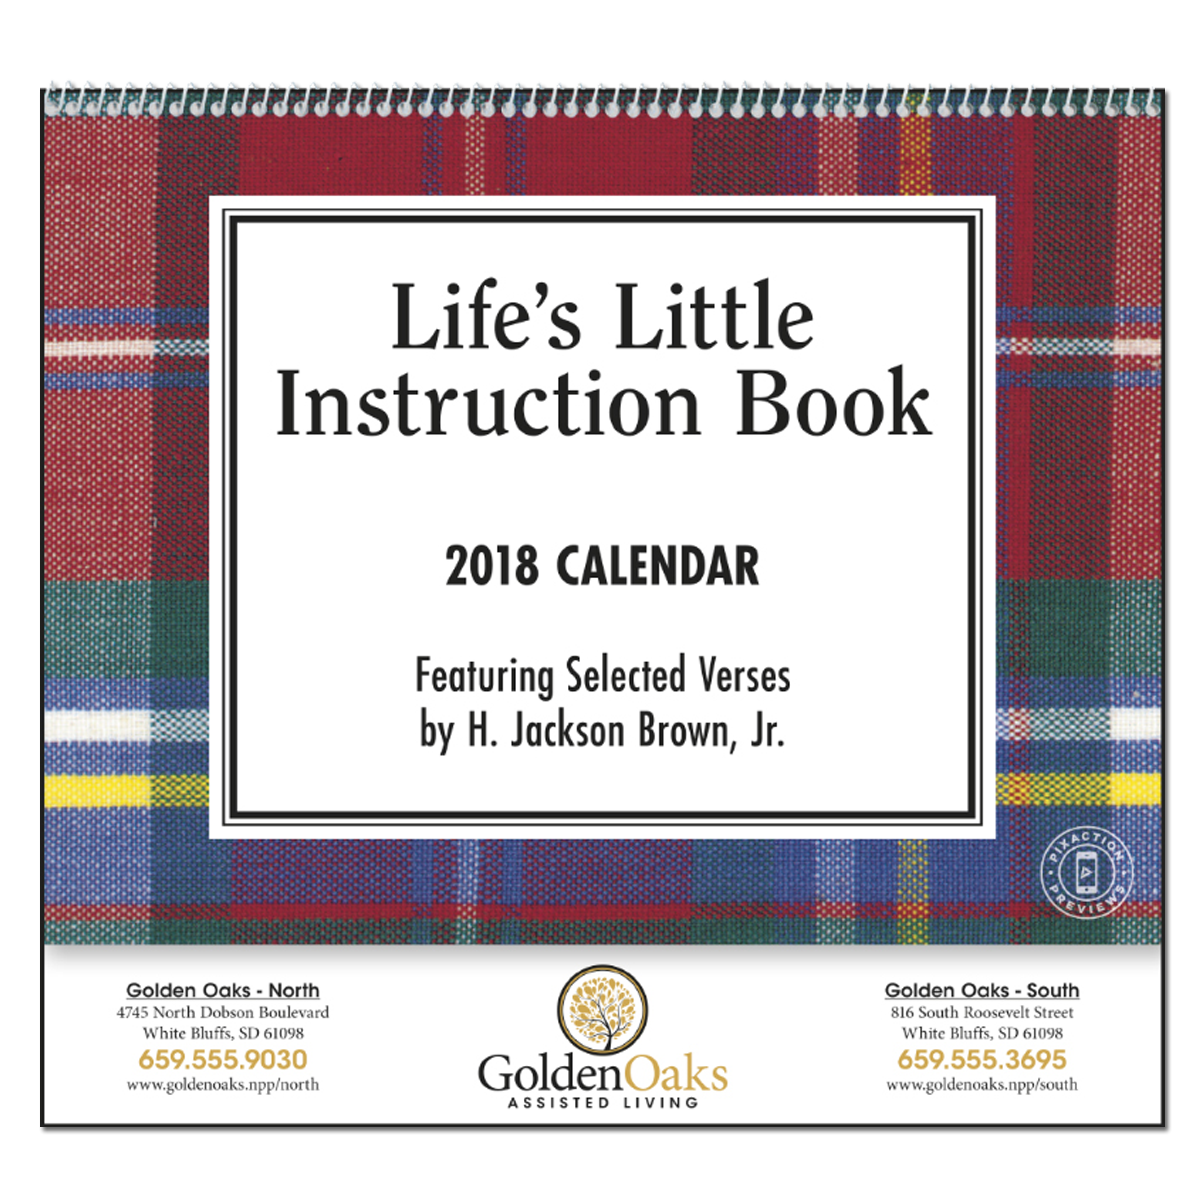 Lifes Little Instruction Book Summary The Complete Lifes Little